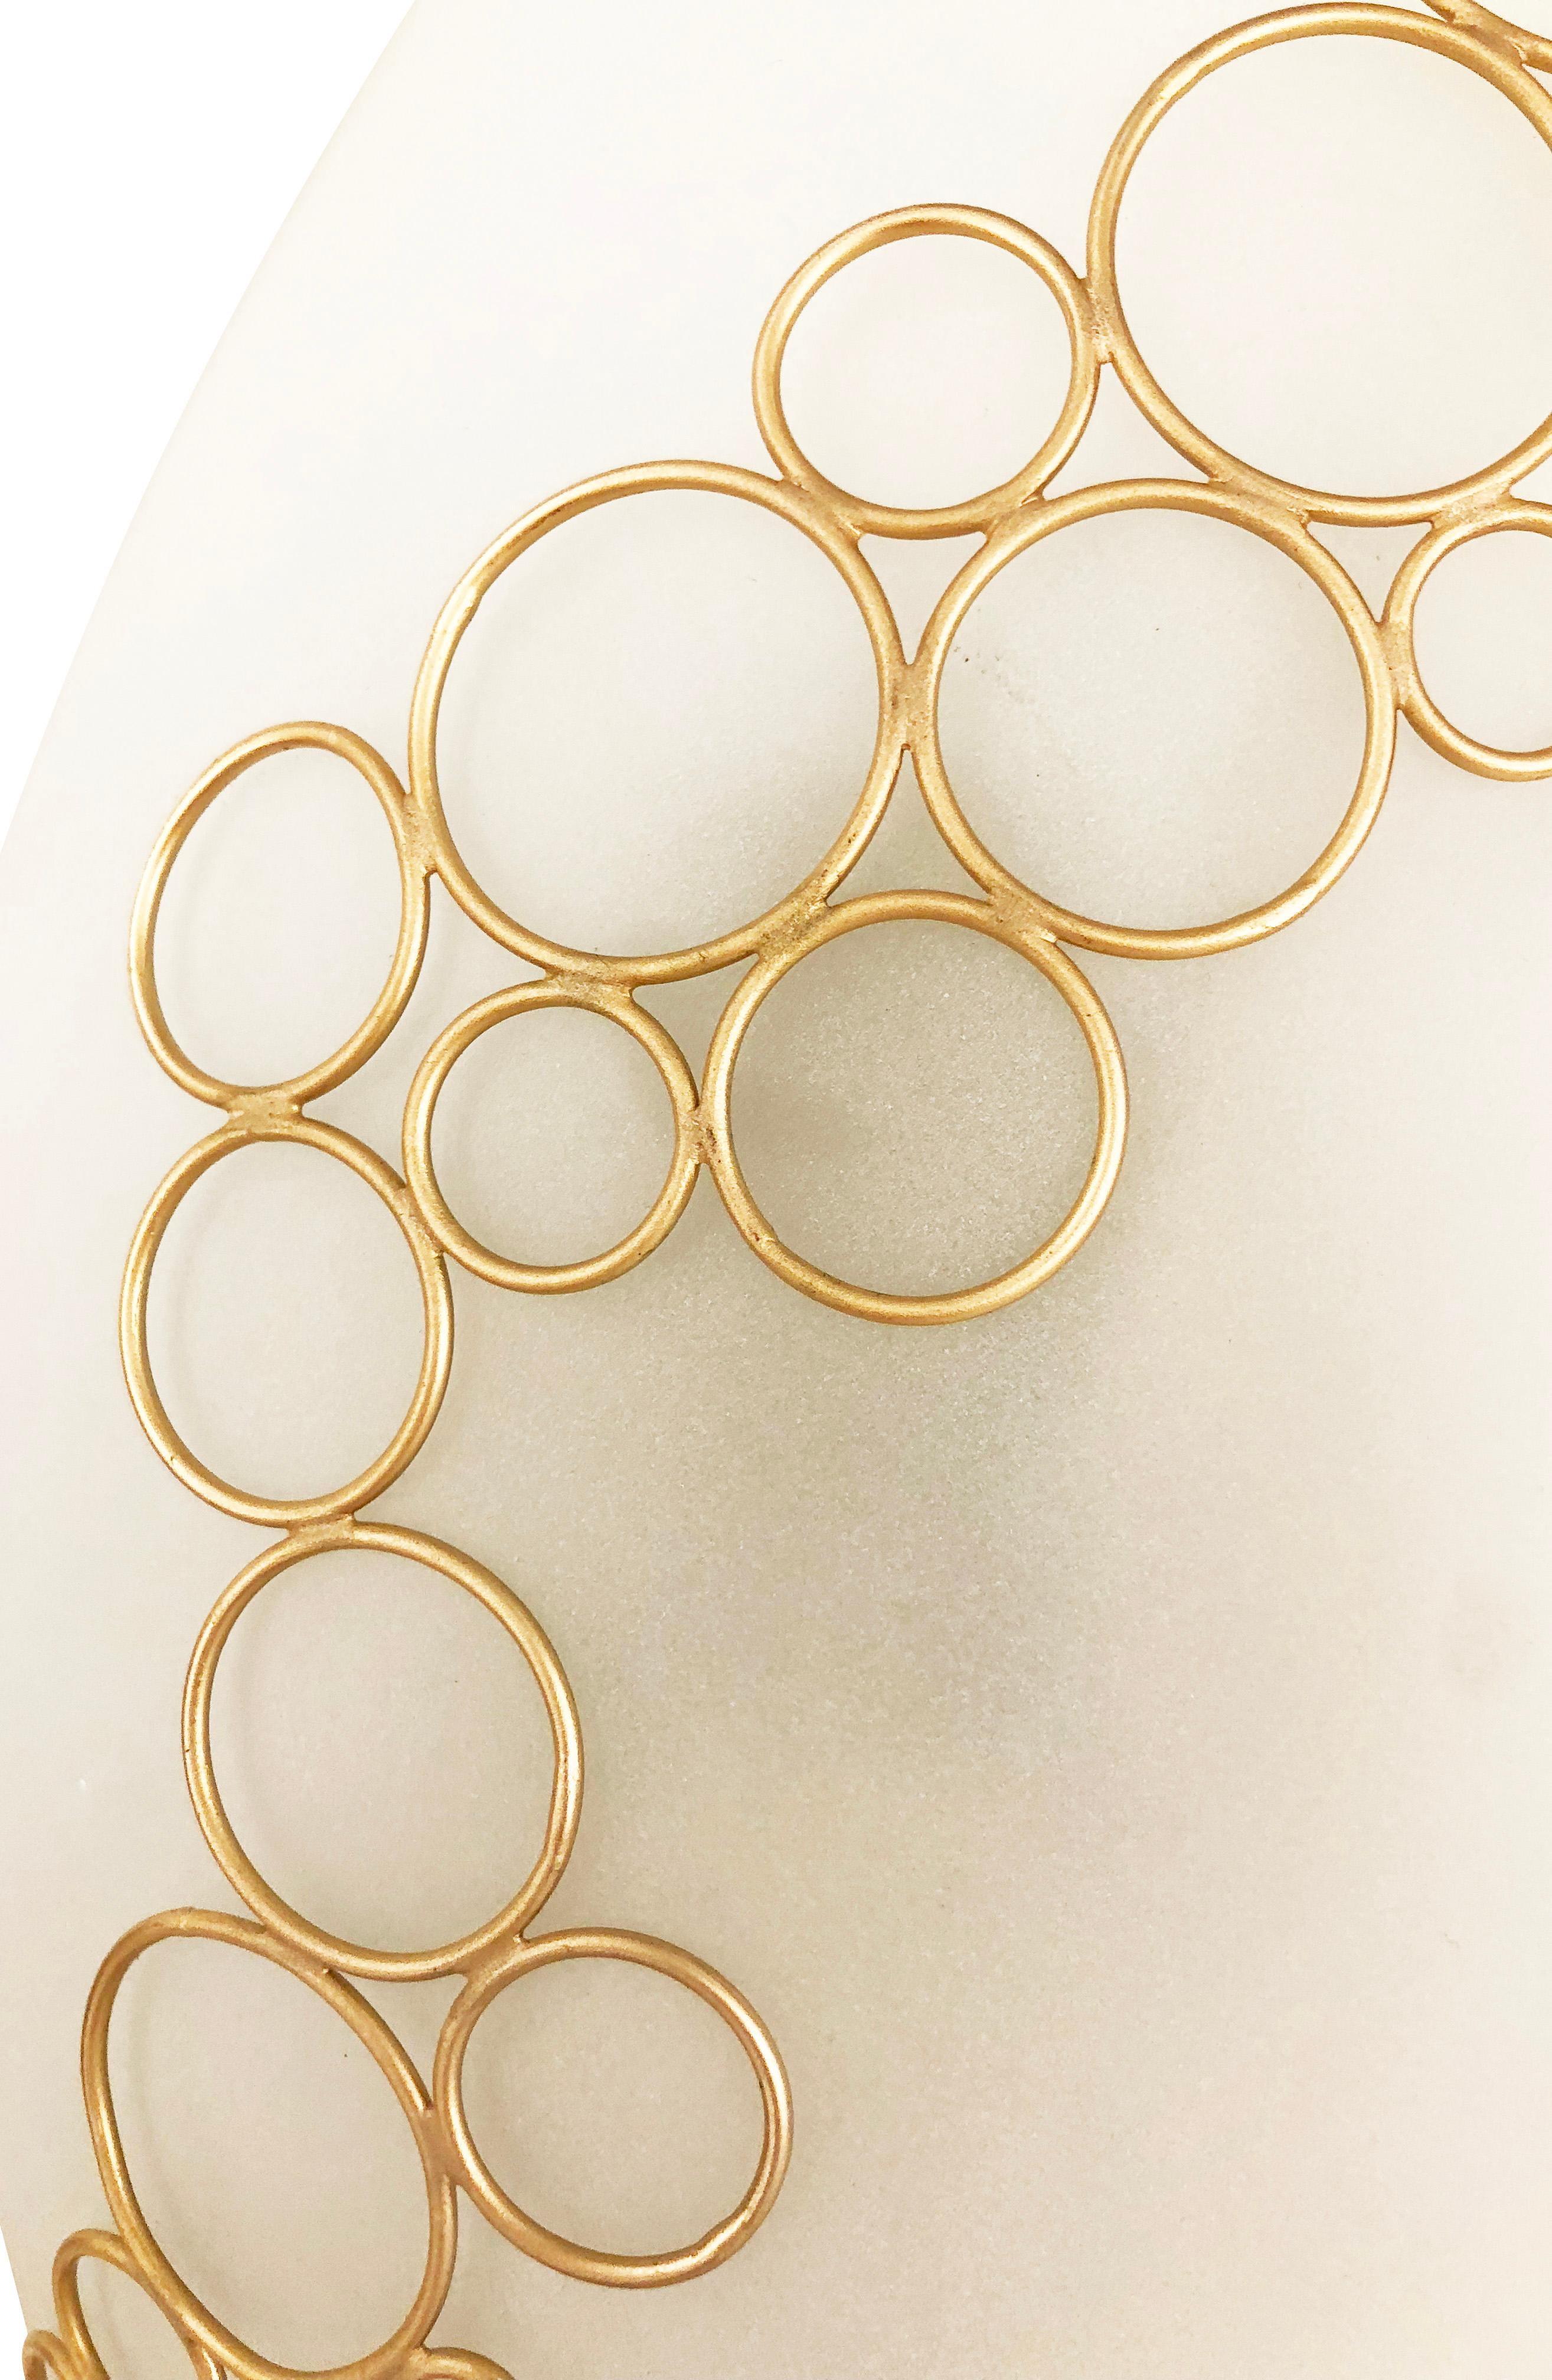 Anelli wall light designed by Gaspare Asaro for his studio collection, formA. Each handmade piece features a white frosted glass decorated with a web of interconnected brass rings. Finish of the brass rings can be customized as needed. Available as